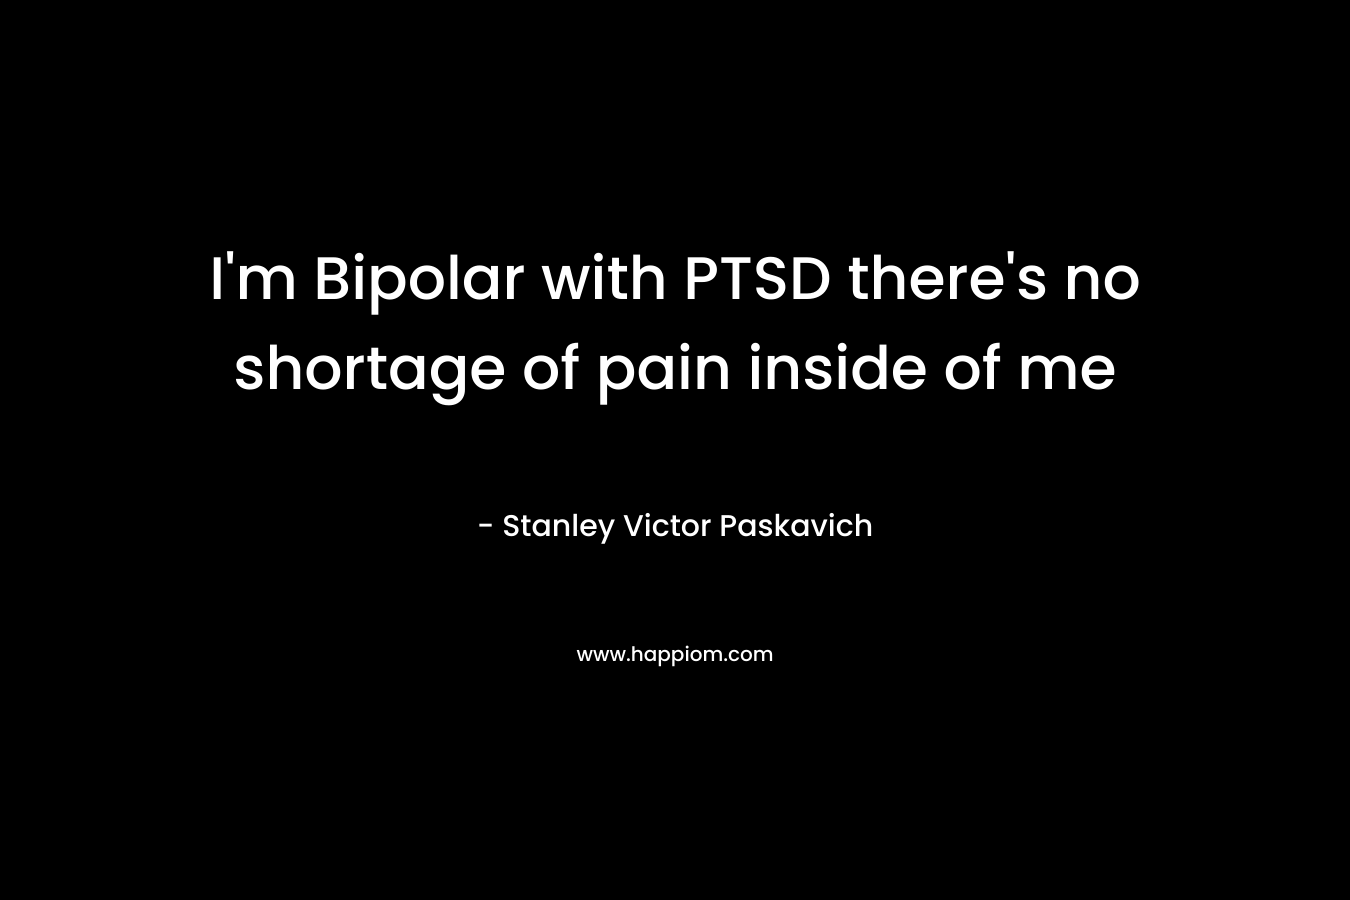 I'm Bipolar with PTSD there's no shortage of pain inside of me